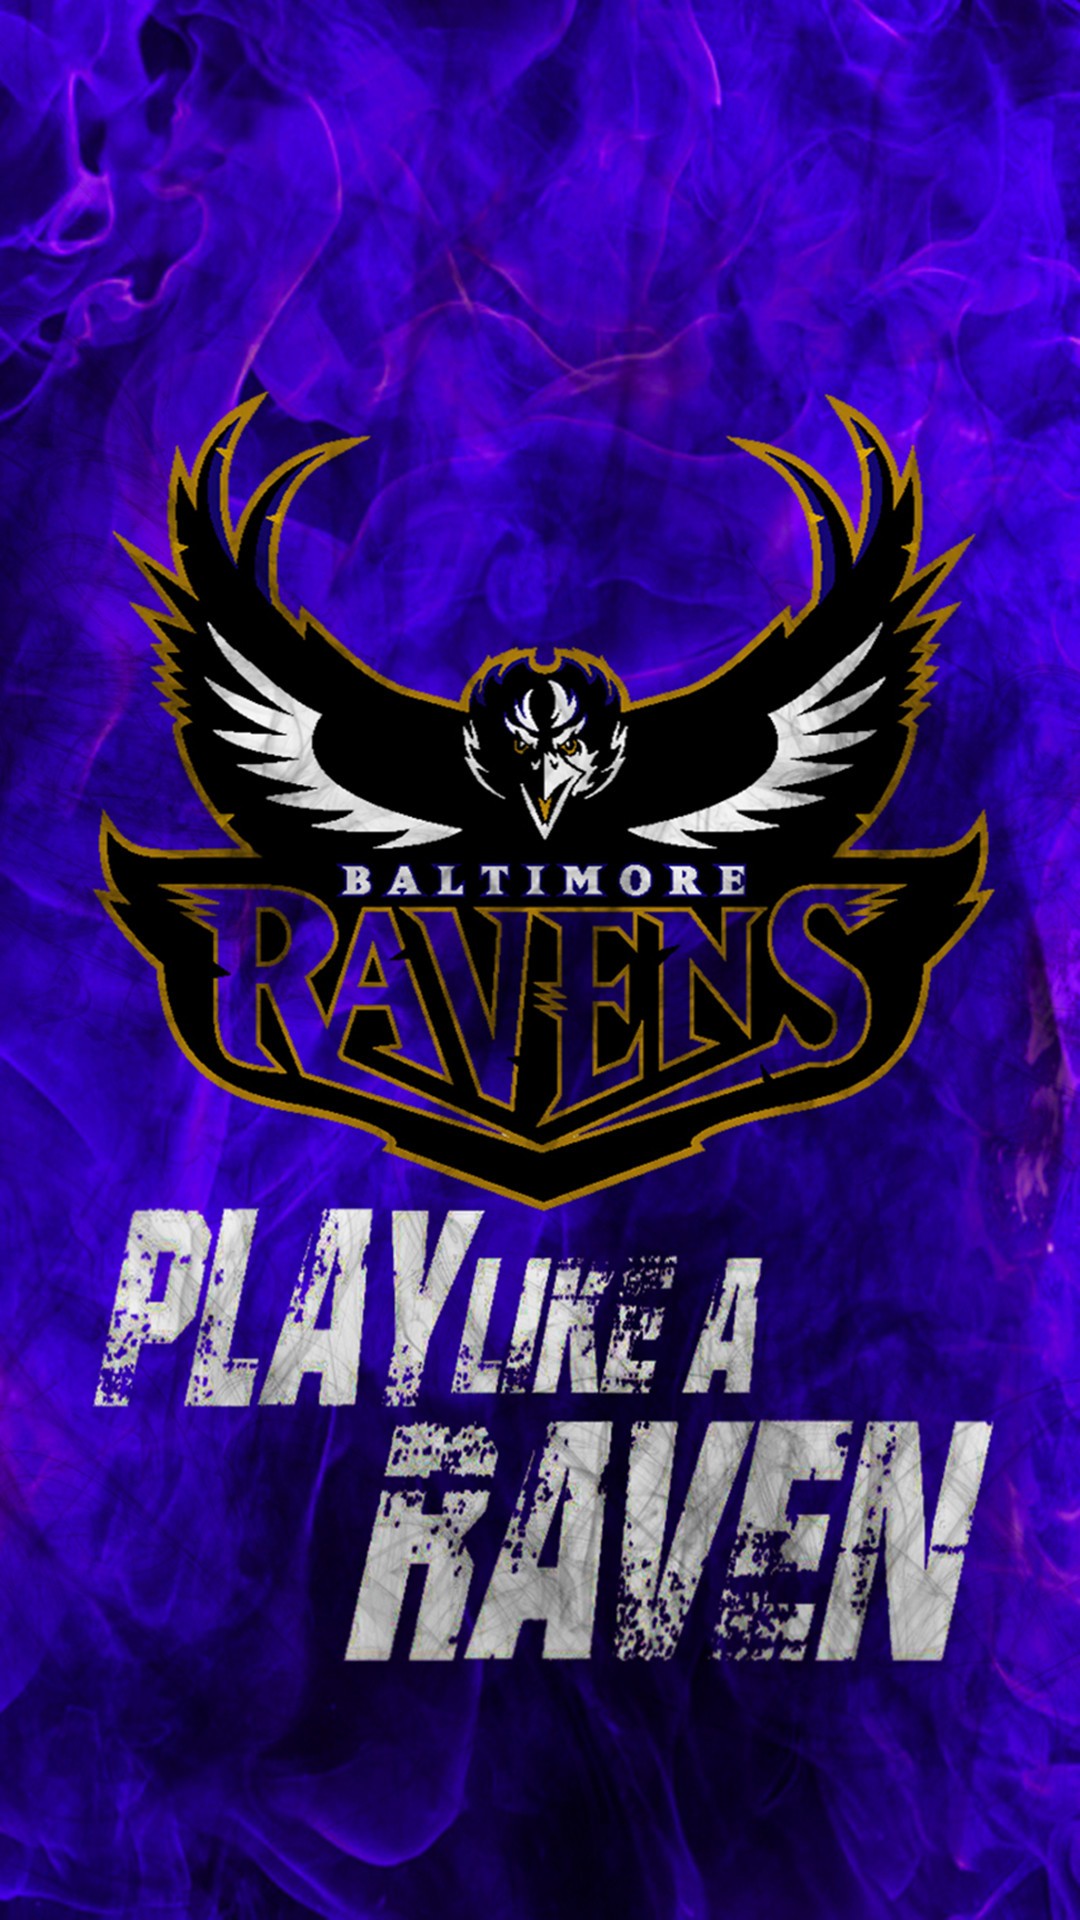 Baltimore Ravens iPhone Backgrounds With high-resolution 1080X1920 pixel. Download and set as wallpaper for Apple iPhone X, XS Max, XR, 8, 7, 6, SE, iPad, Android